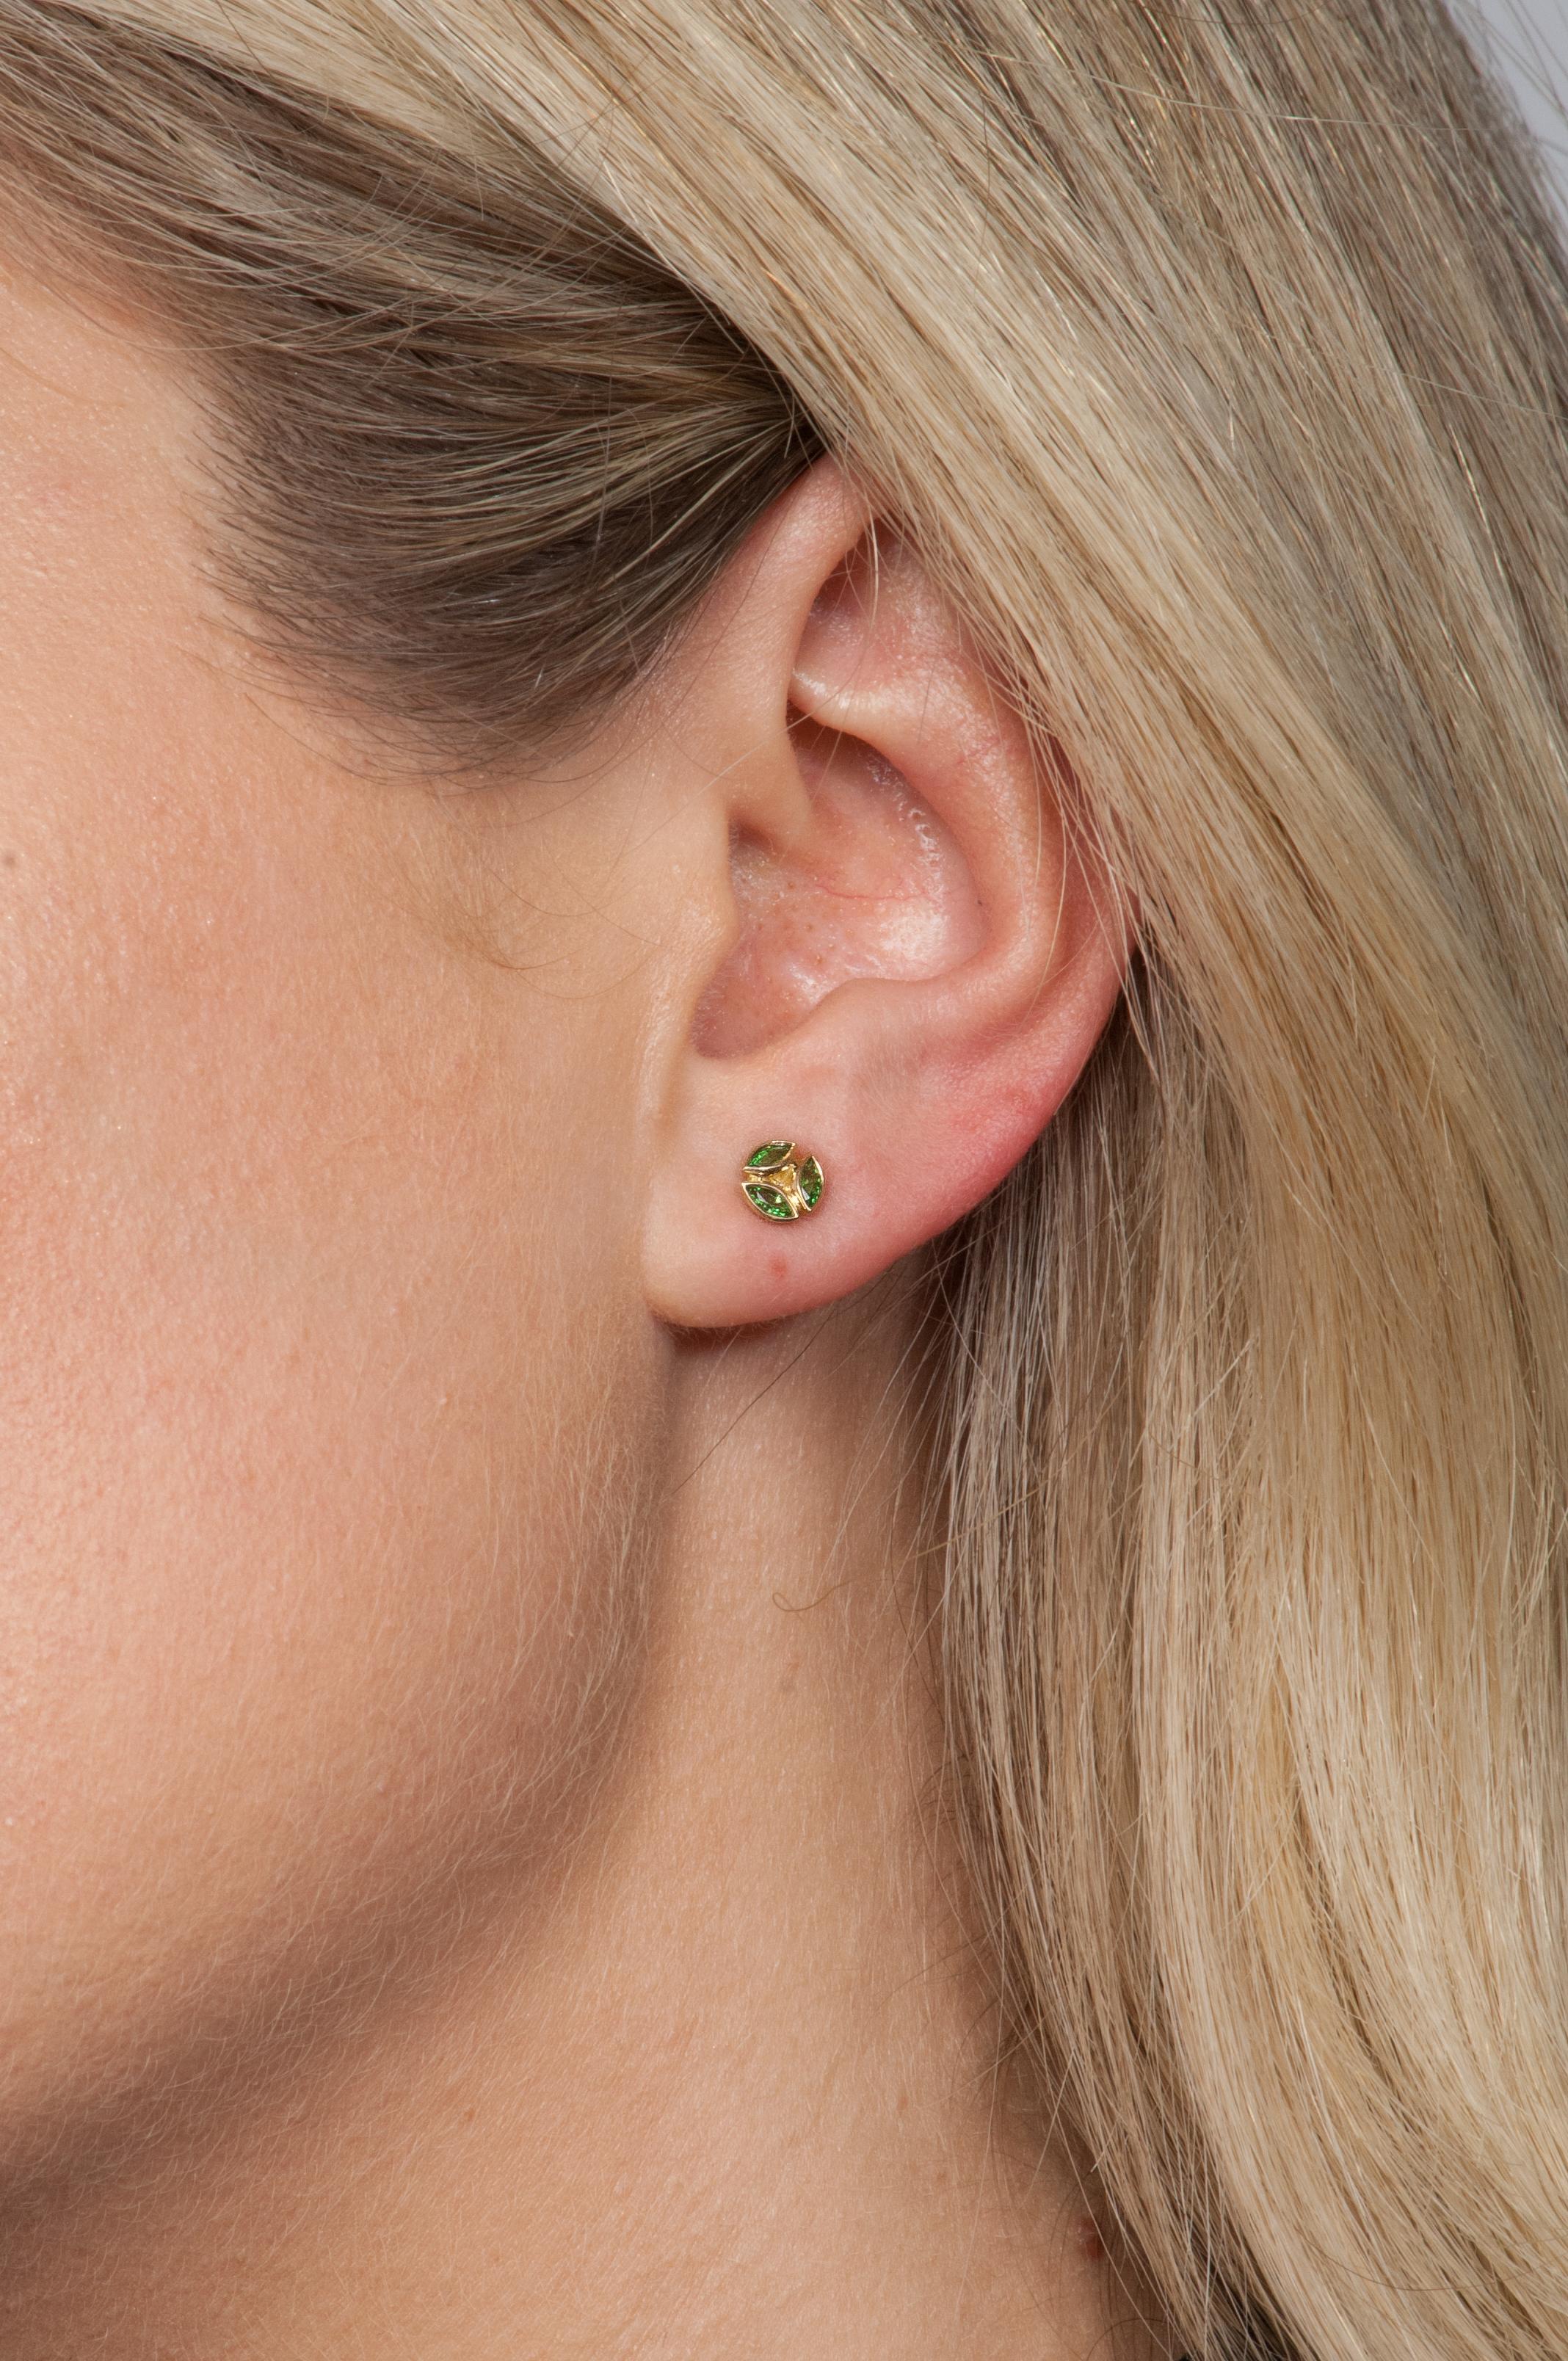 These delicate tsavorite studs are an easy everyday choice. Wear alone for a classic look or stack above your favorite hoops.

18K yellow gold with tsavorites (0.46tcw)
0.24” diameter
